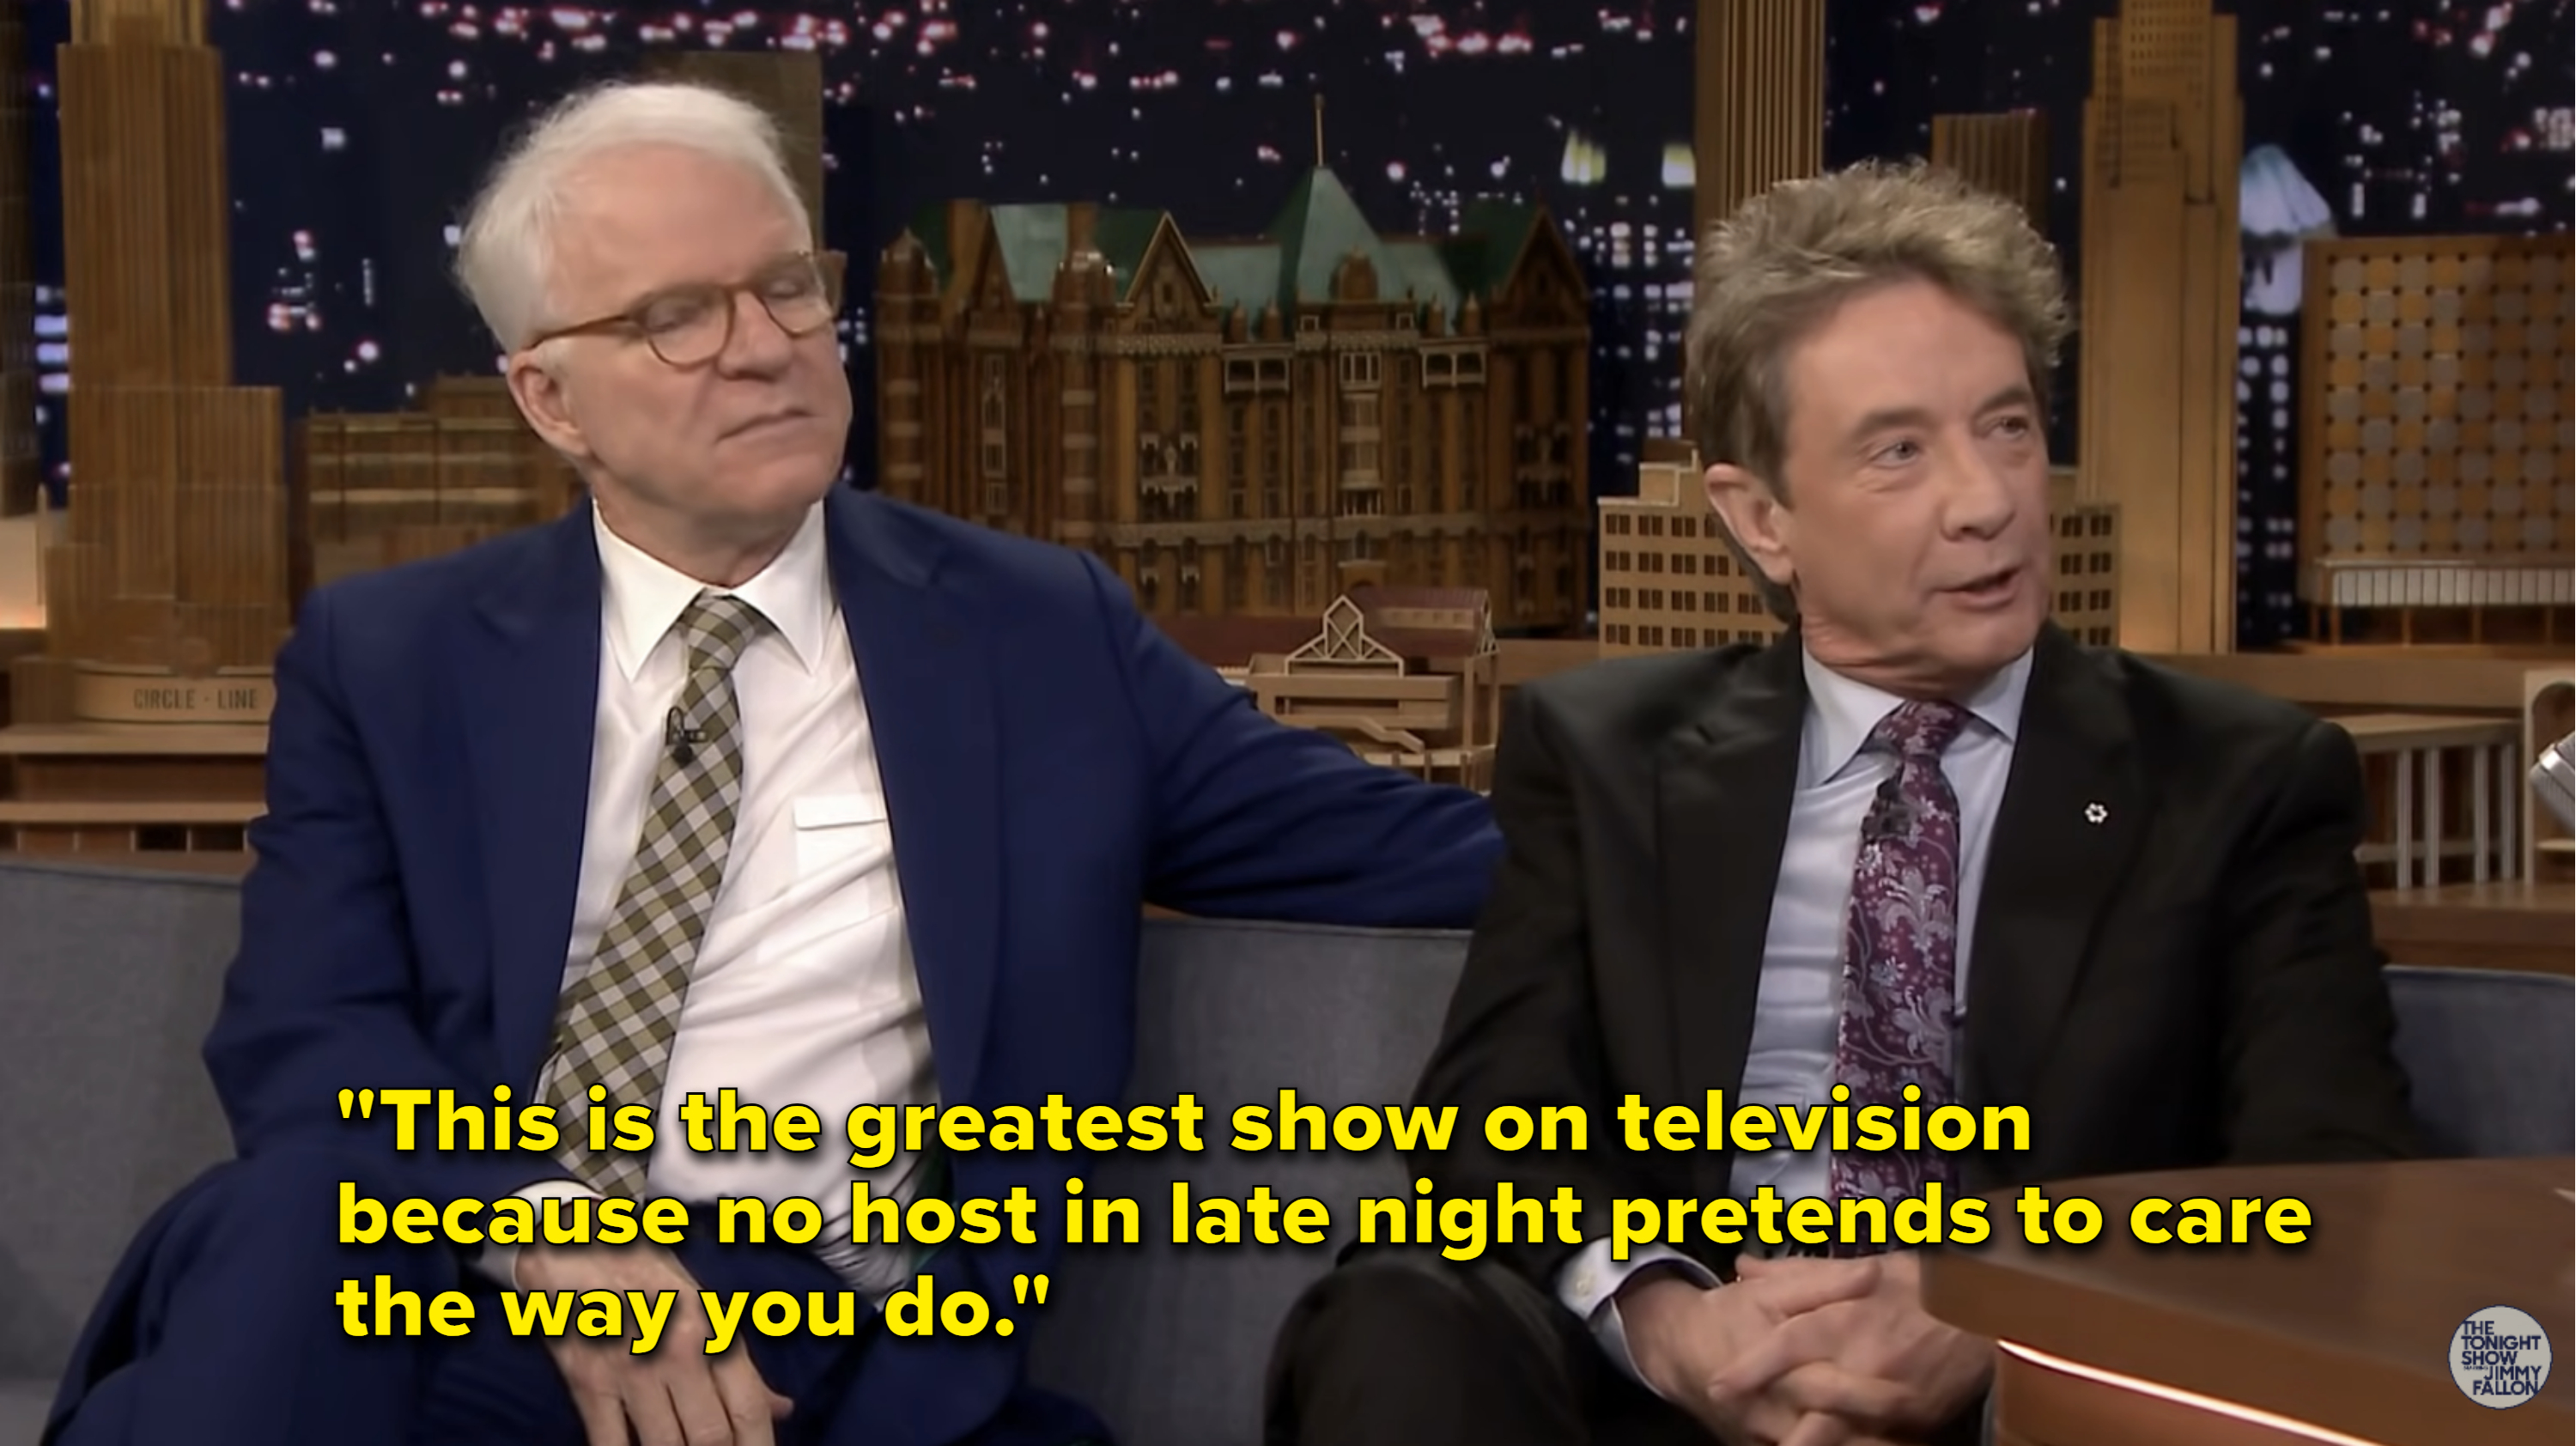 Martin Short said, &quot;This is the greatest show on television because no host in late night pretends to care the way you do&quot;